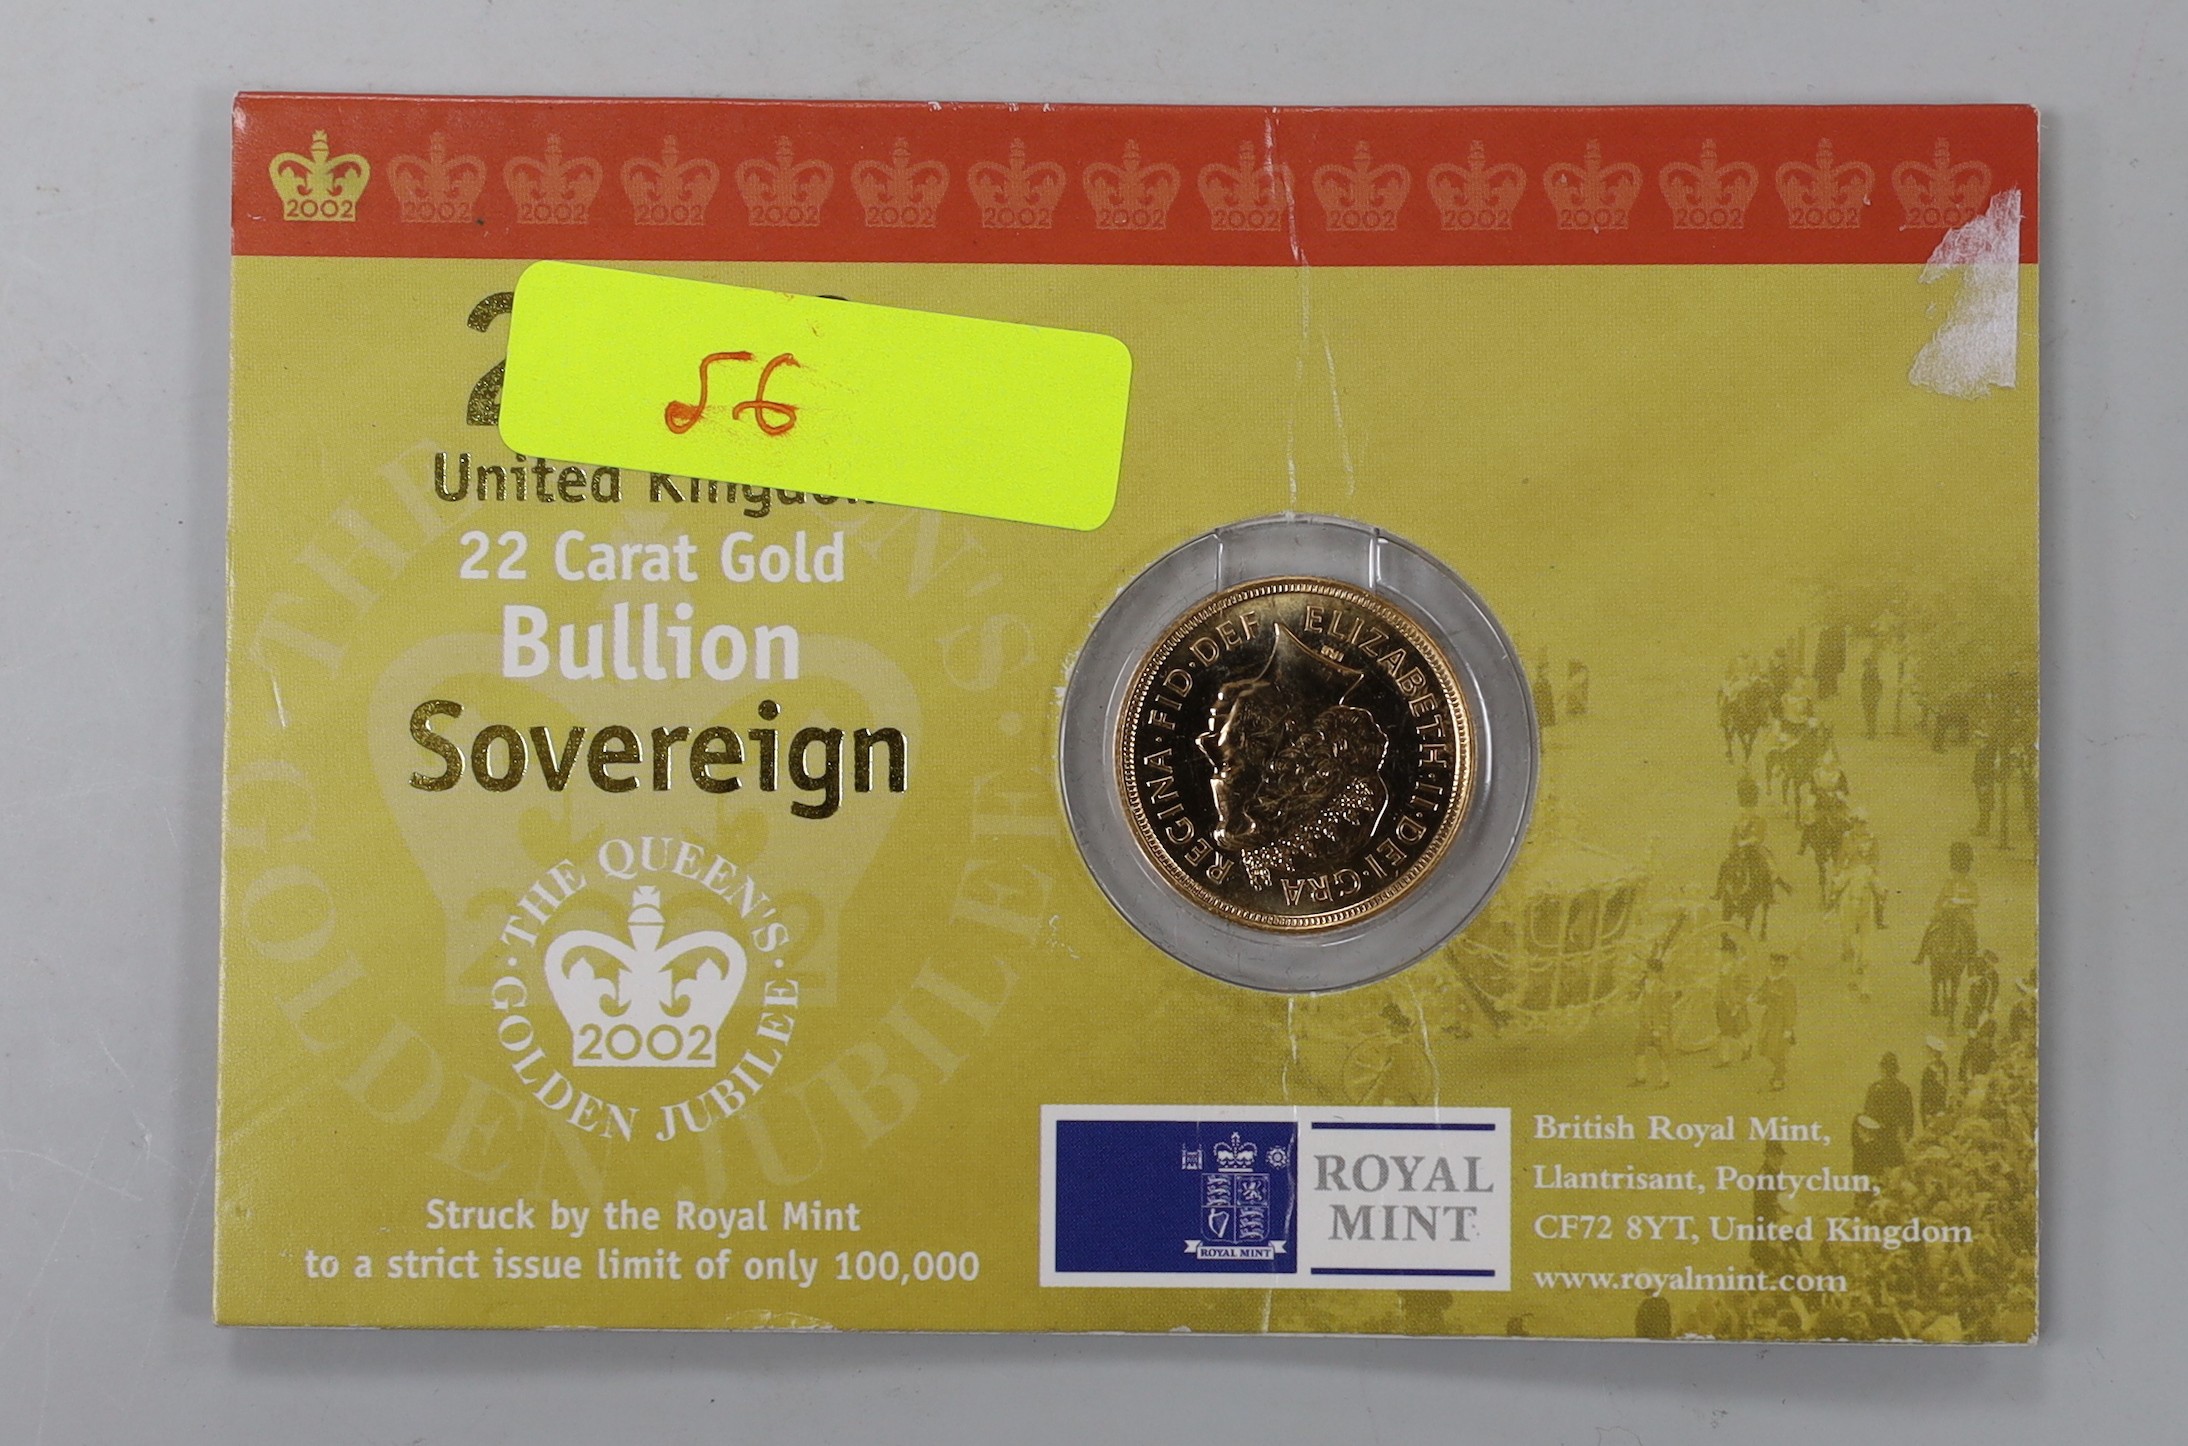 A 2002 limited Royal Mint Collector’s edition gold sovereign.